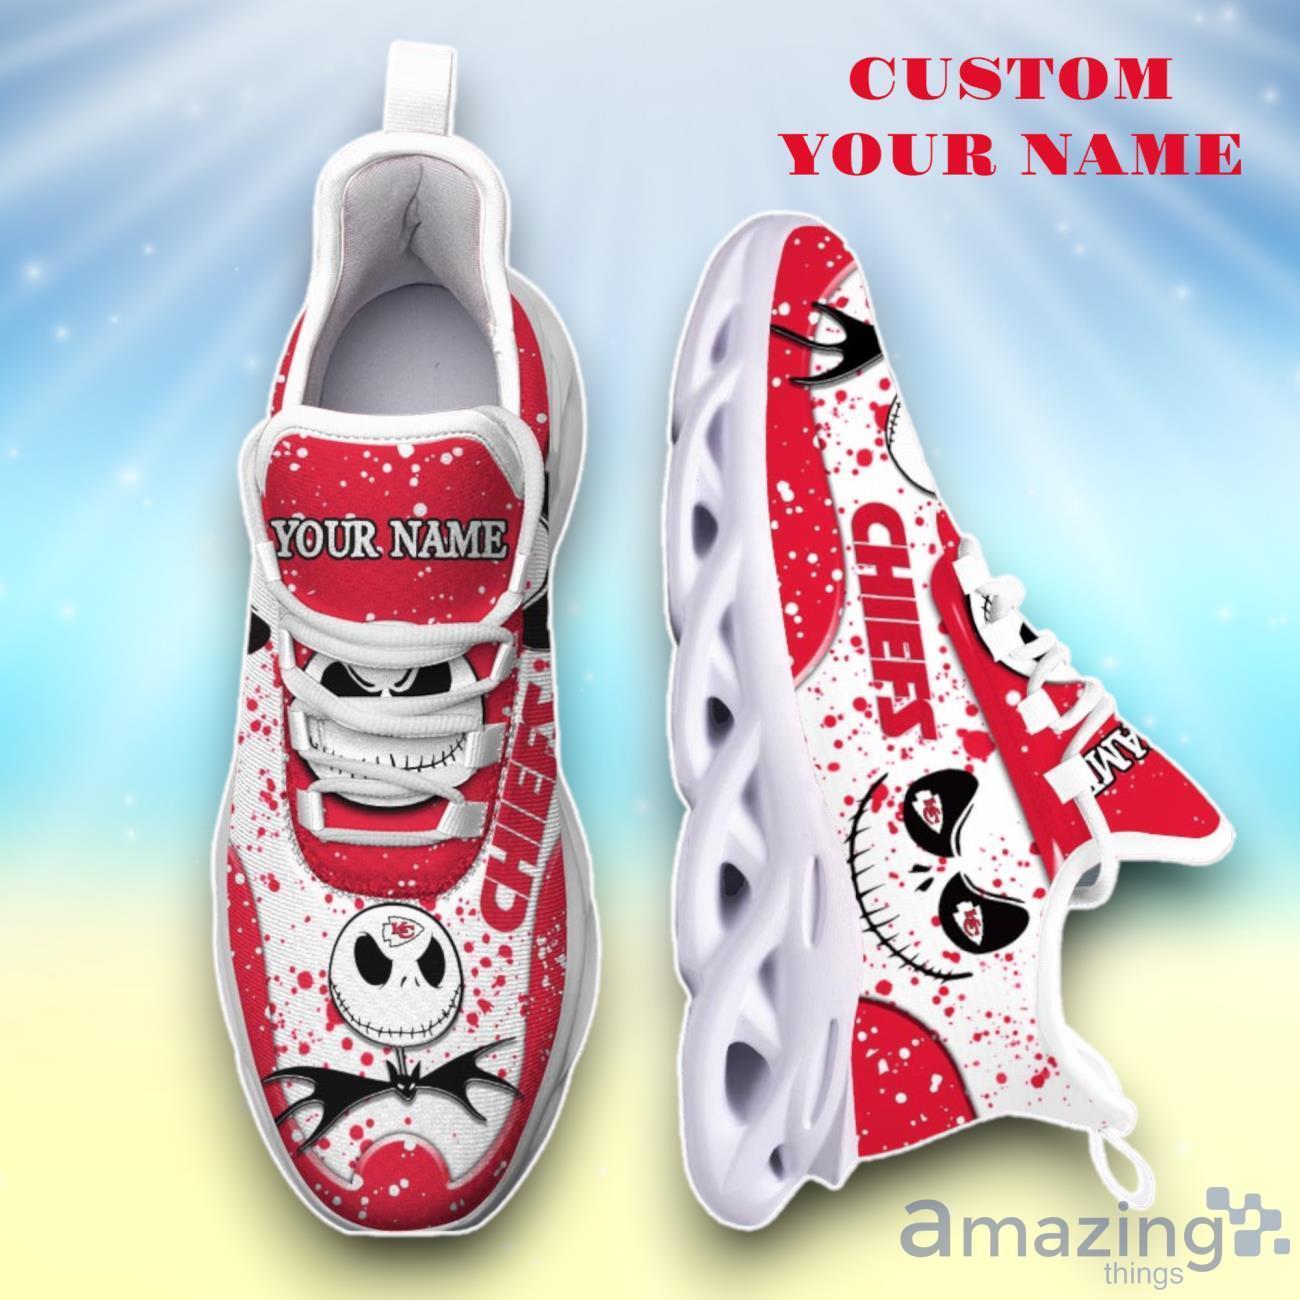 Kansas City Chiefs White C Max Soul Shoes Custom Name Exclusive Sneakers For Fans Product Photo 1